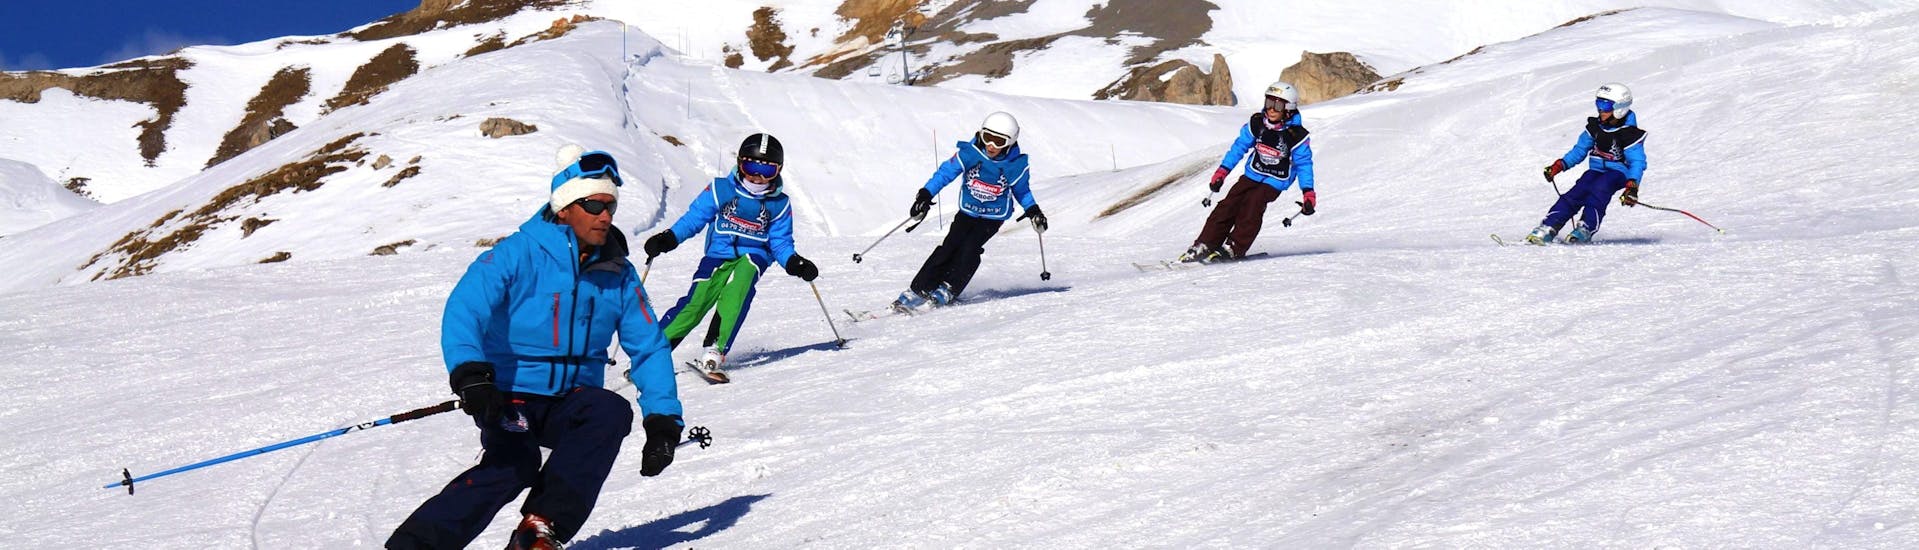 Young skiers are following their instructor from the ski school Snocool in Sainte-Foy-Tarentaise on a snowy slope during their Kids Ski Lessons "Pop 6" (10-17 years) - Advanced. 